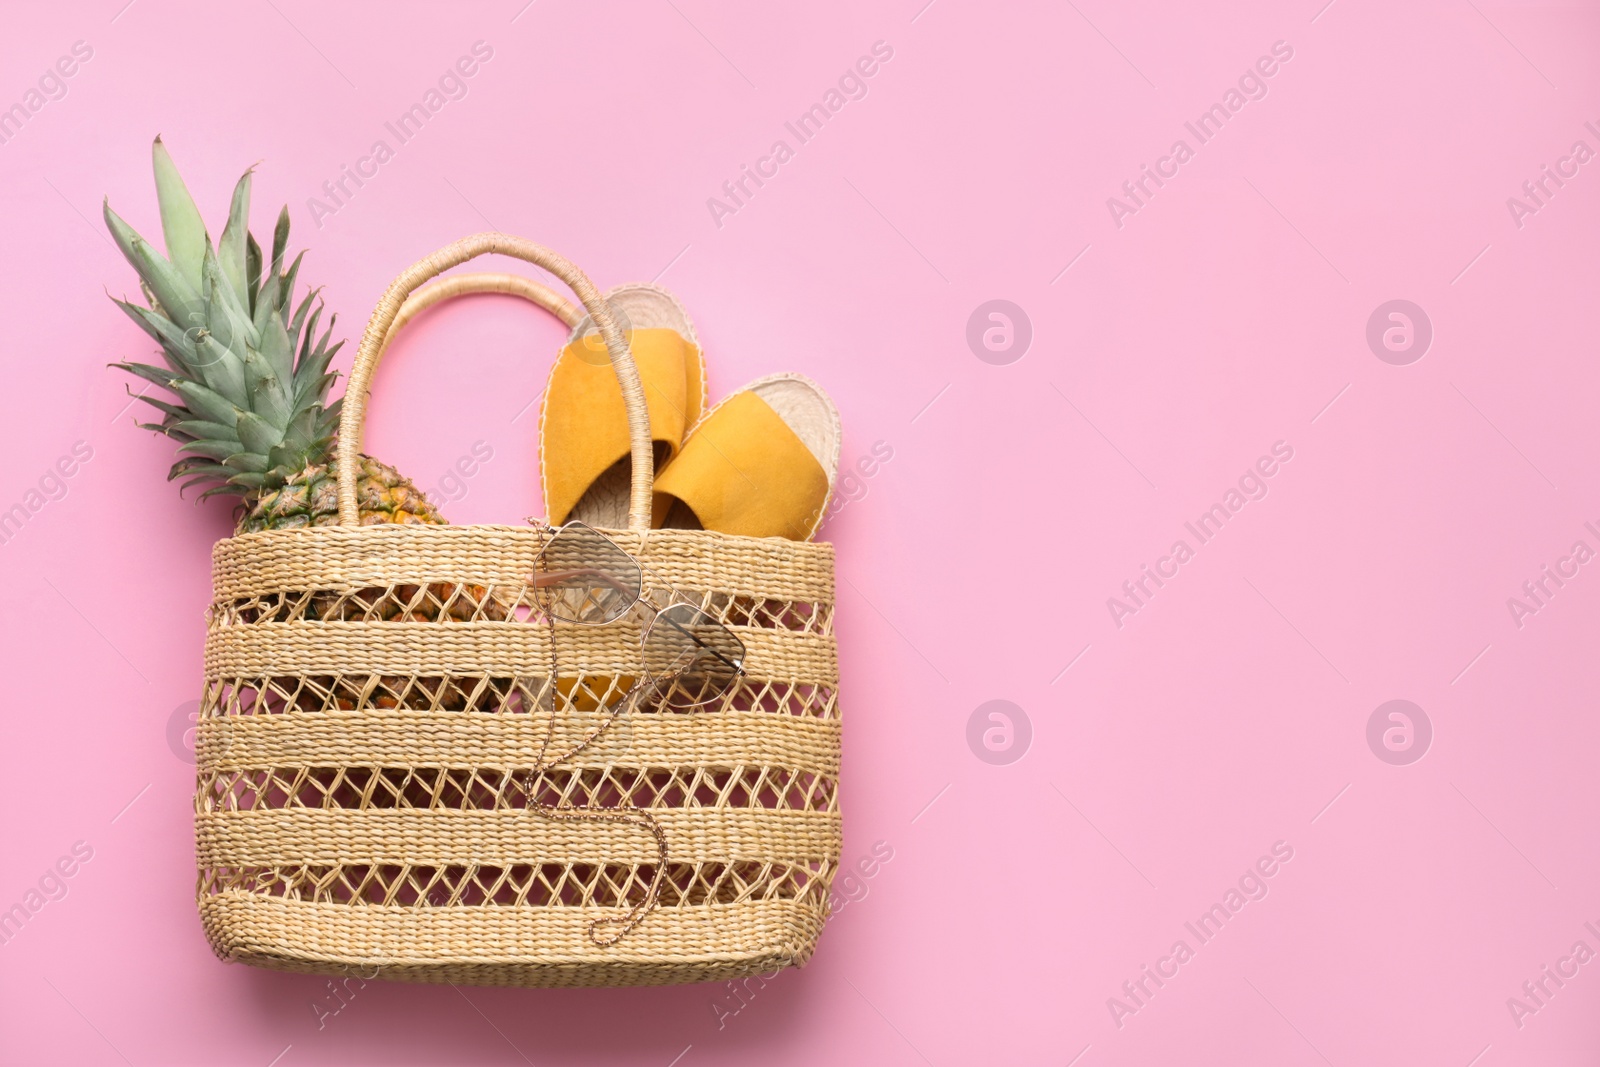 Photo of Elegant woman's straw bag with shoes, sunglasses and pineapple on pink background, top view. Space for text